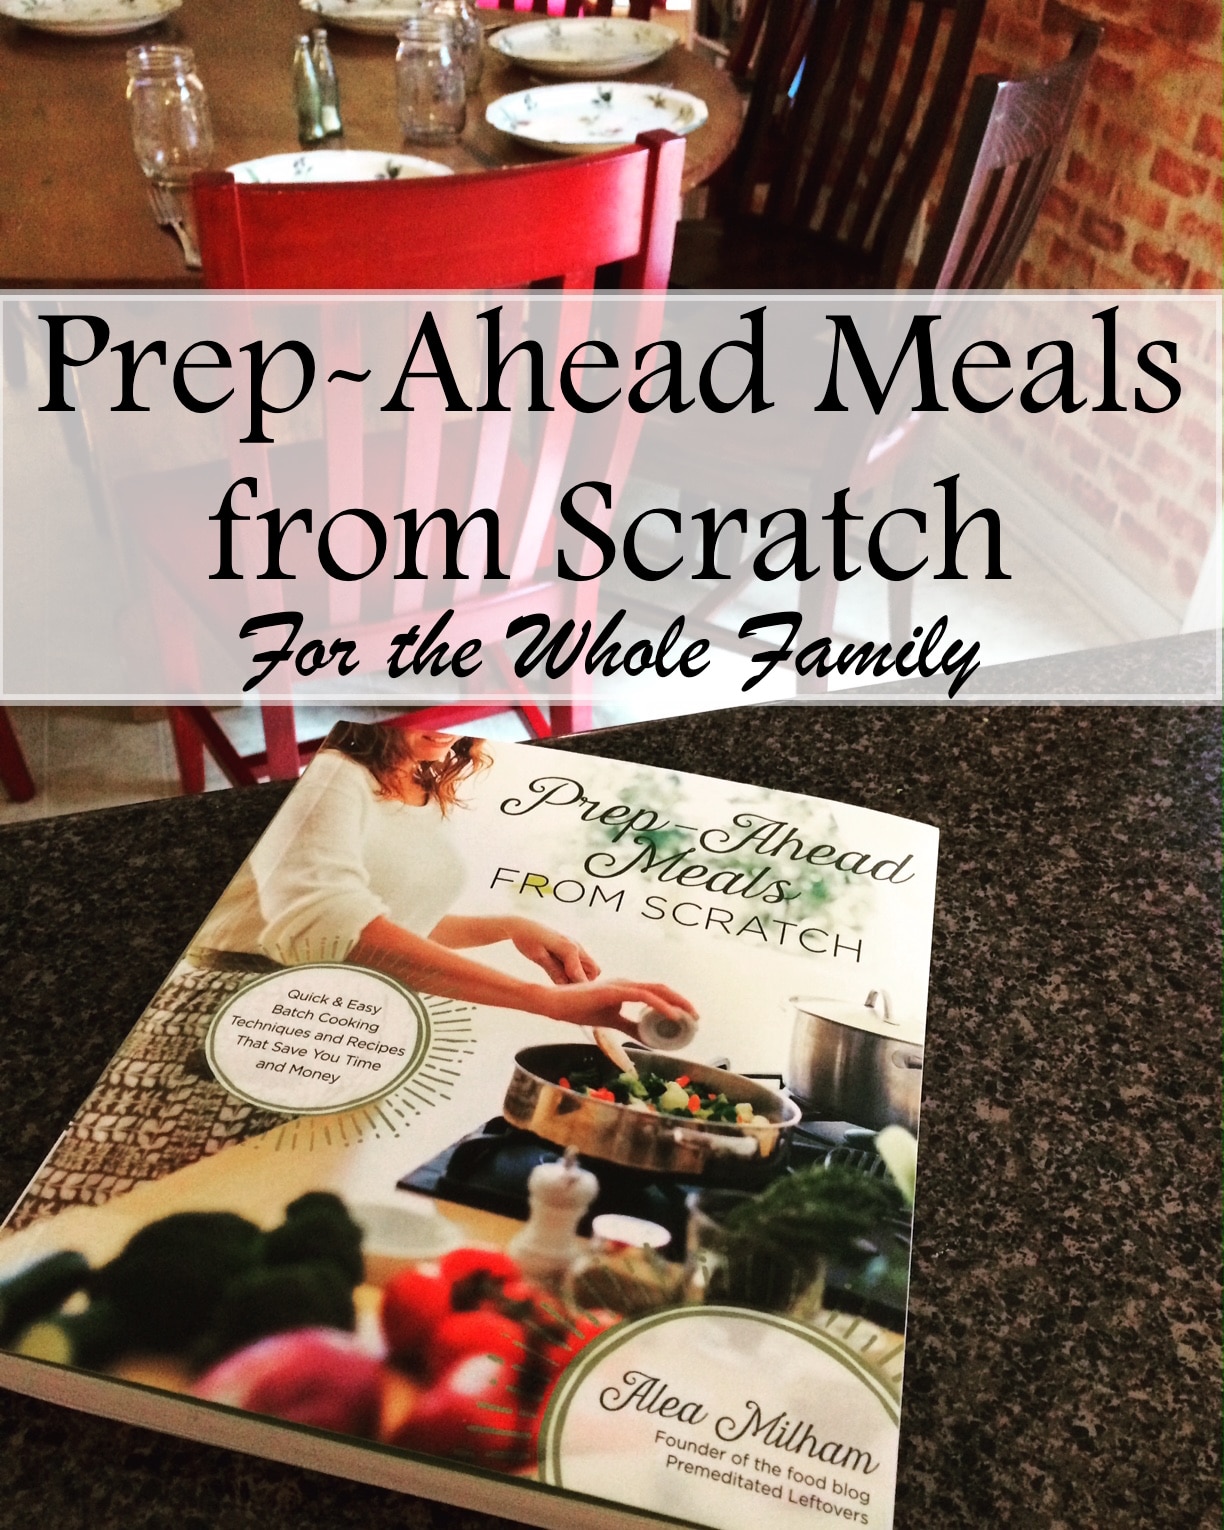 Prep-Ahead Meals From Scratch for The Whole Family